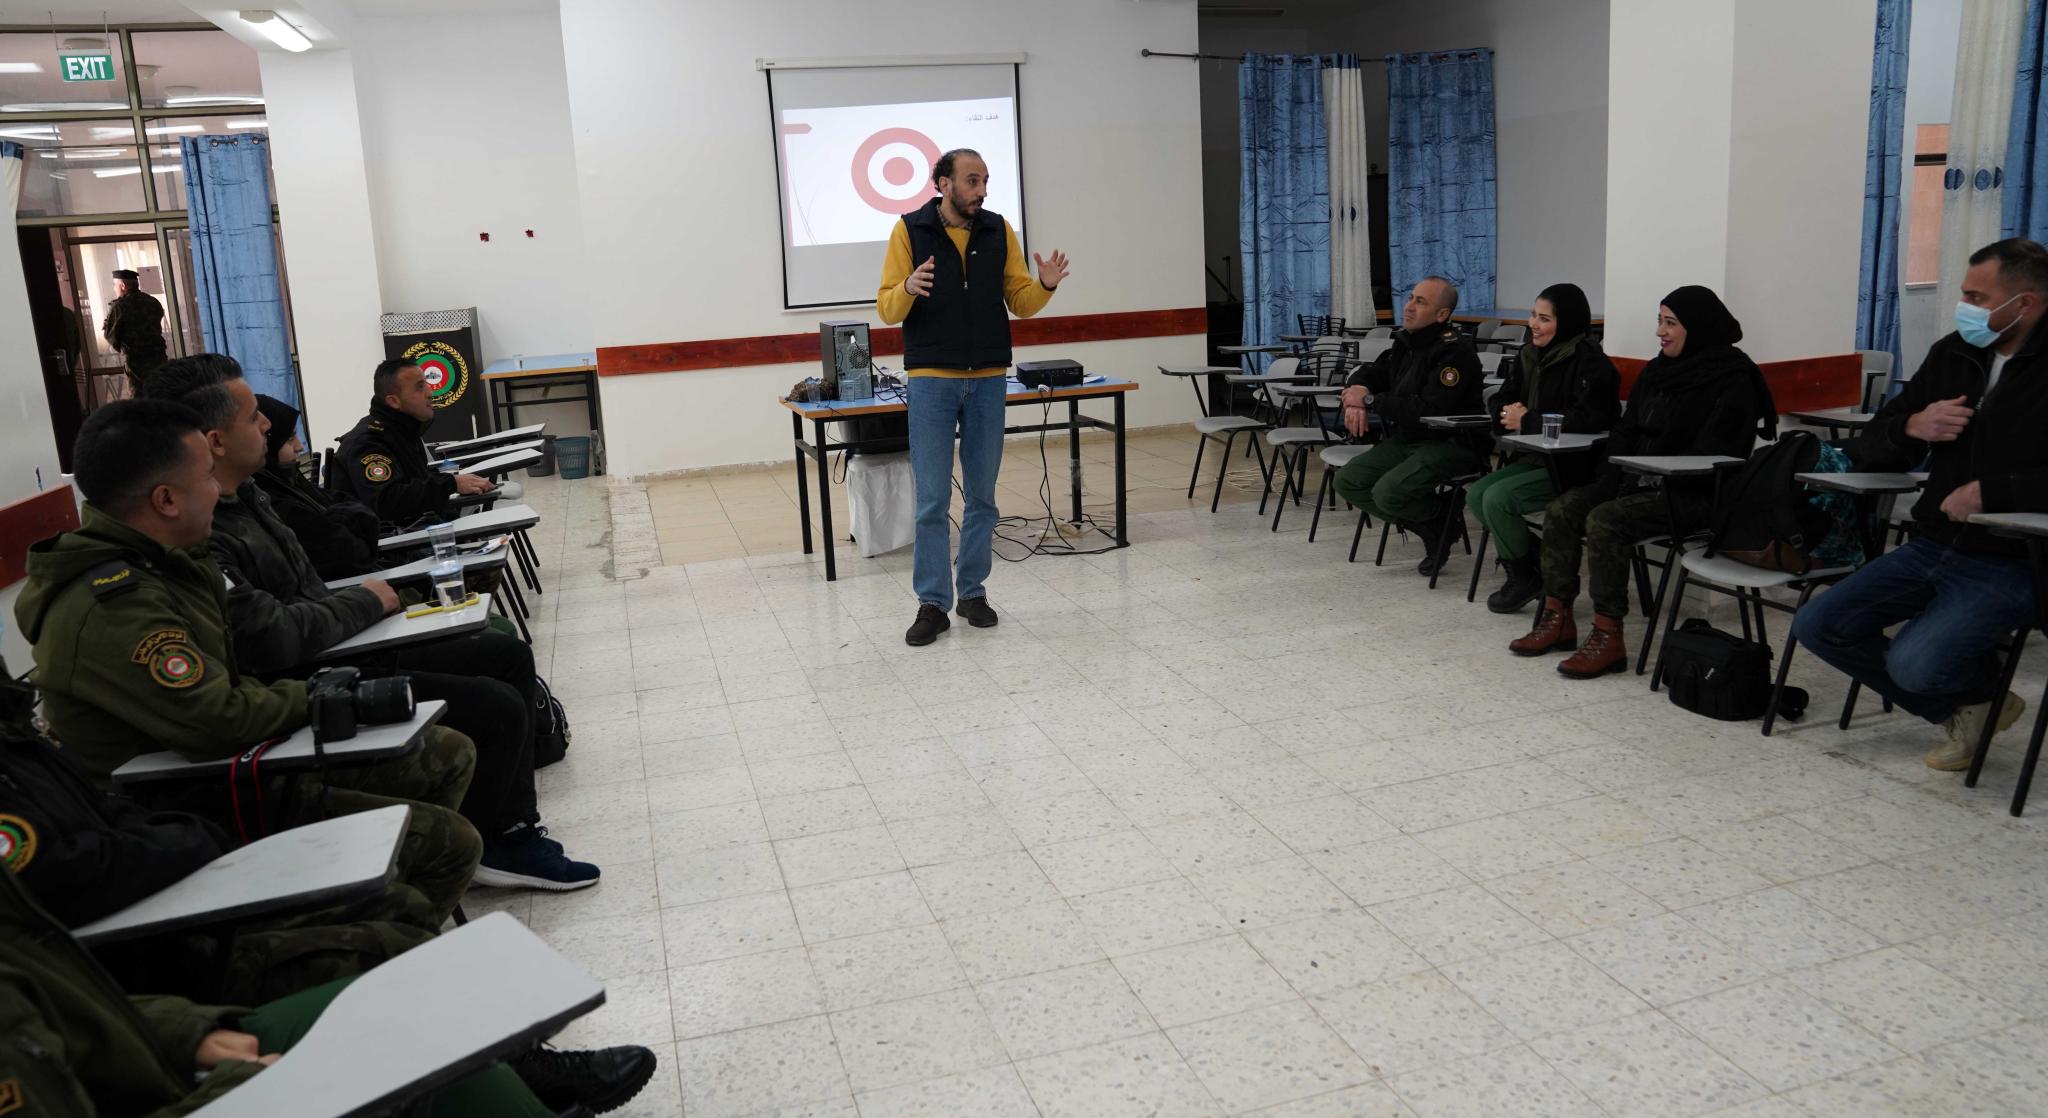 AAUP Organizes a Training Course in “Media and Photography” for the Public Relations Employees in the National Security Agency in the West Bank